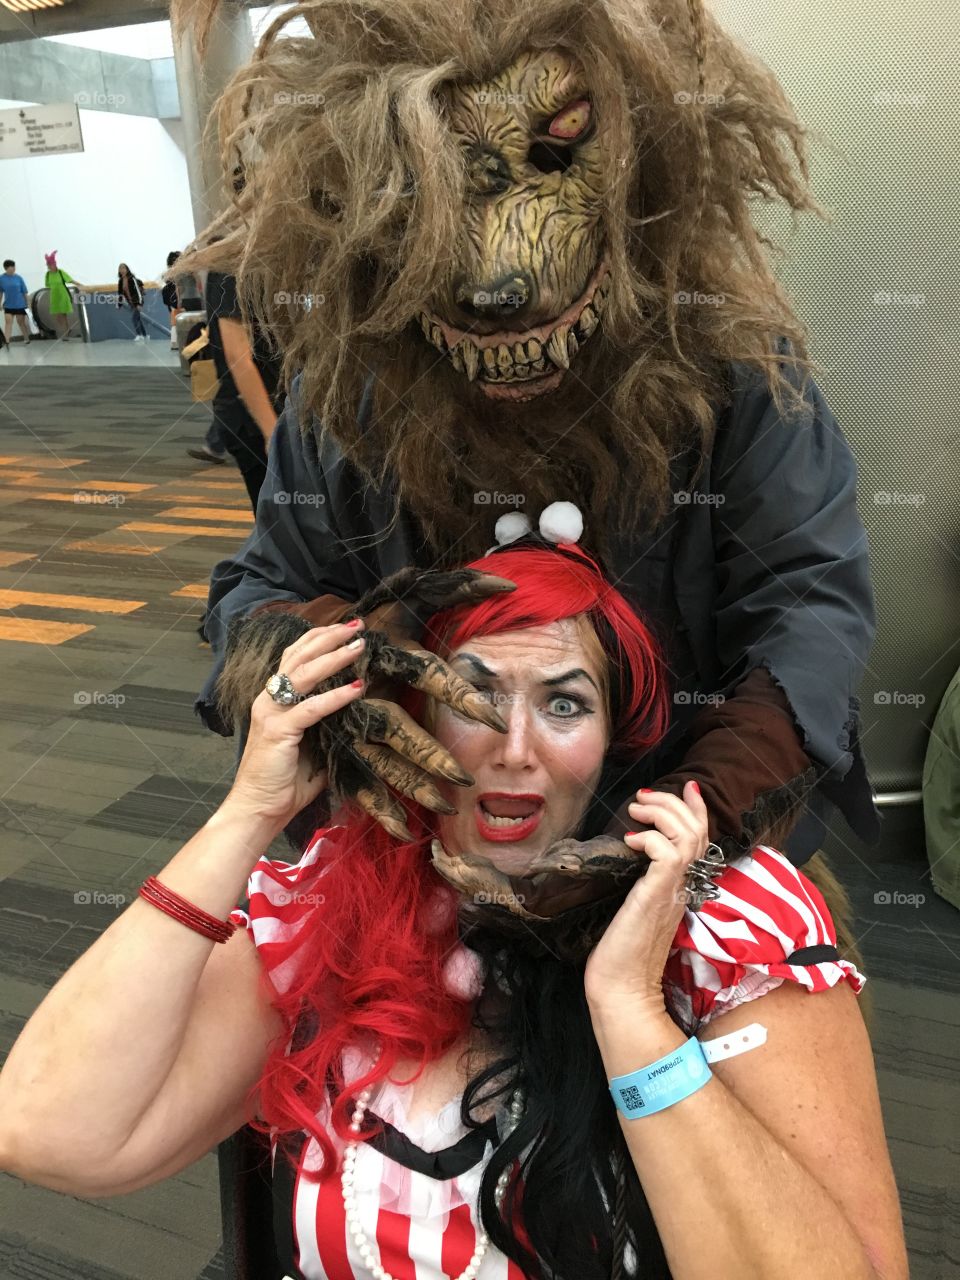 Harley Quinn at San Jose Comicon being attacked by a horrific monstrous werewolf who is trying to devour her with his menacing sharp teeth 